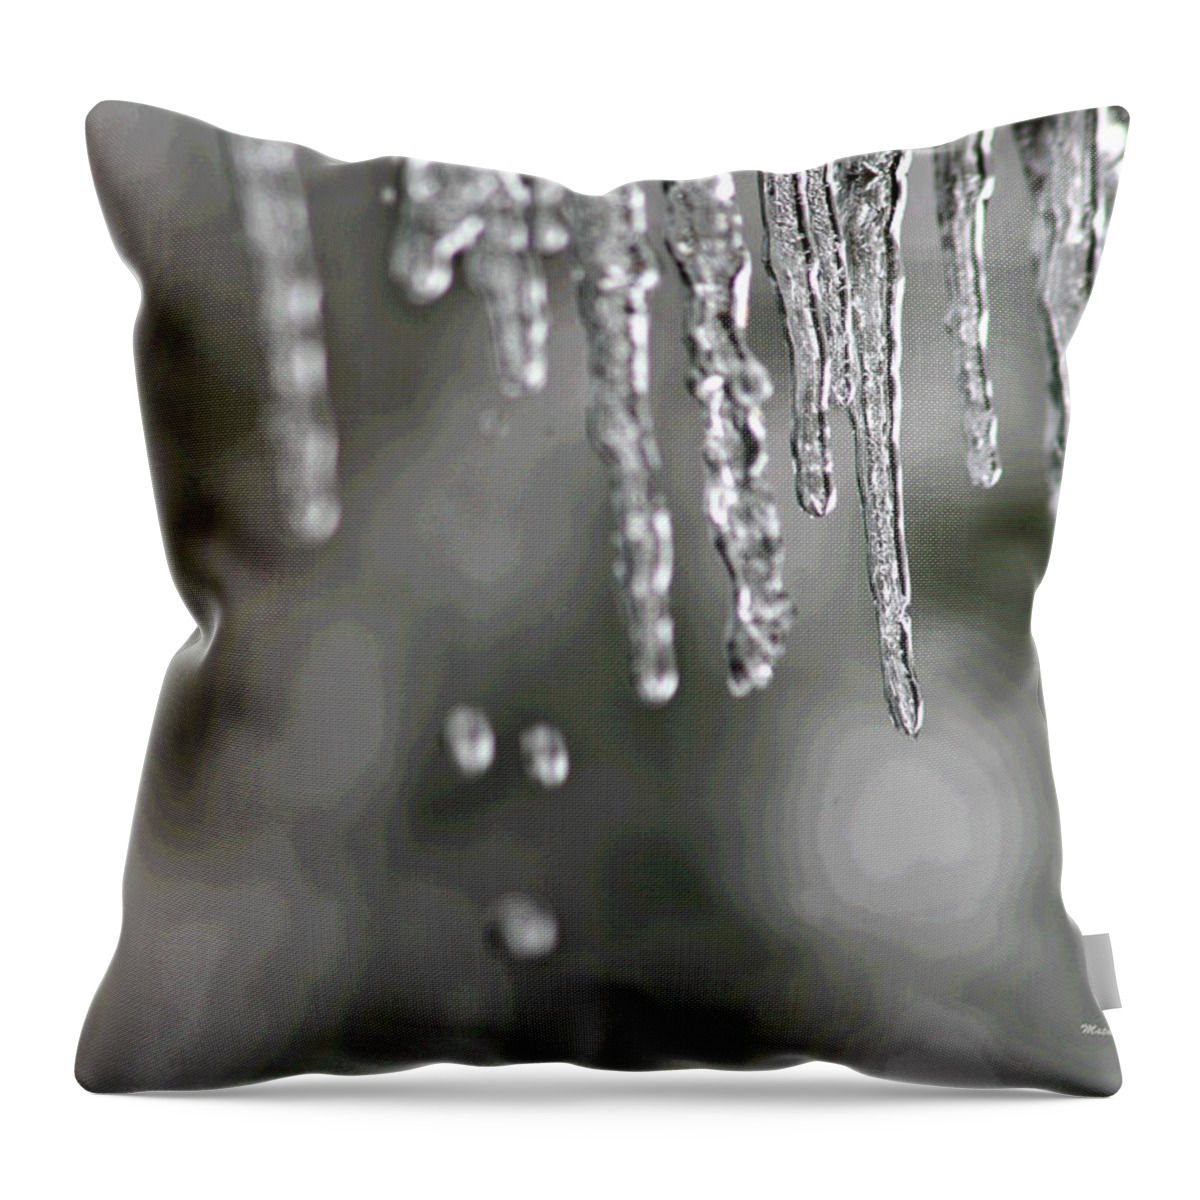  Throw Pillow featuring the photograph Icicles by Matalyn Gardner